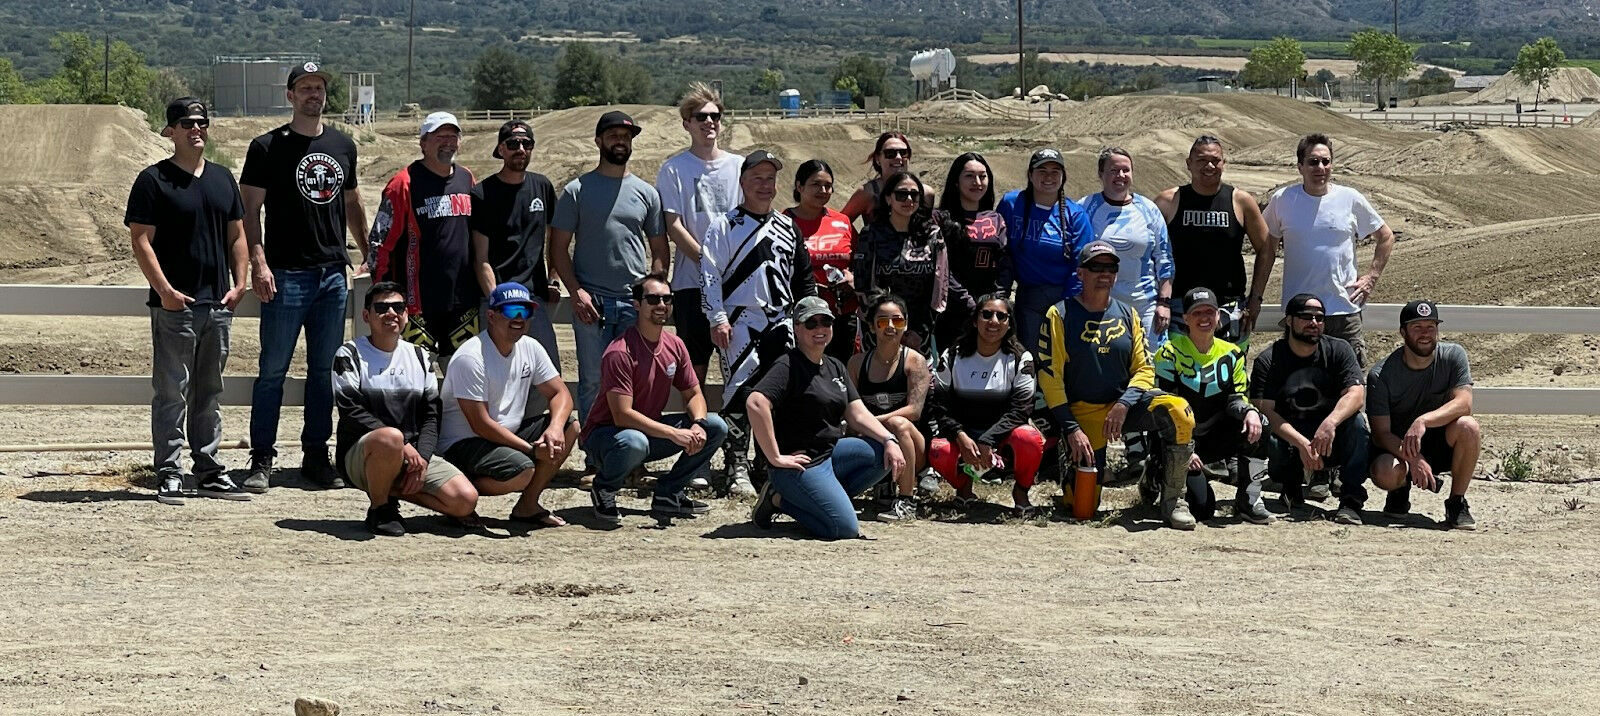 Over 25 NPA San Diego employees enjoyed a learn to ride coaching day with USMCA coaches at Fox Raceway in April 2022. Photo courtesy USMCA.